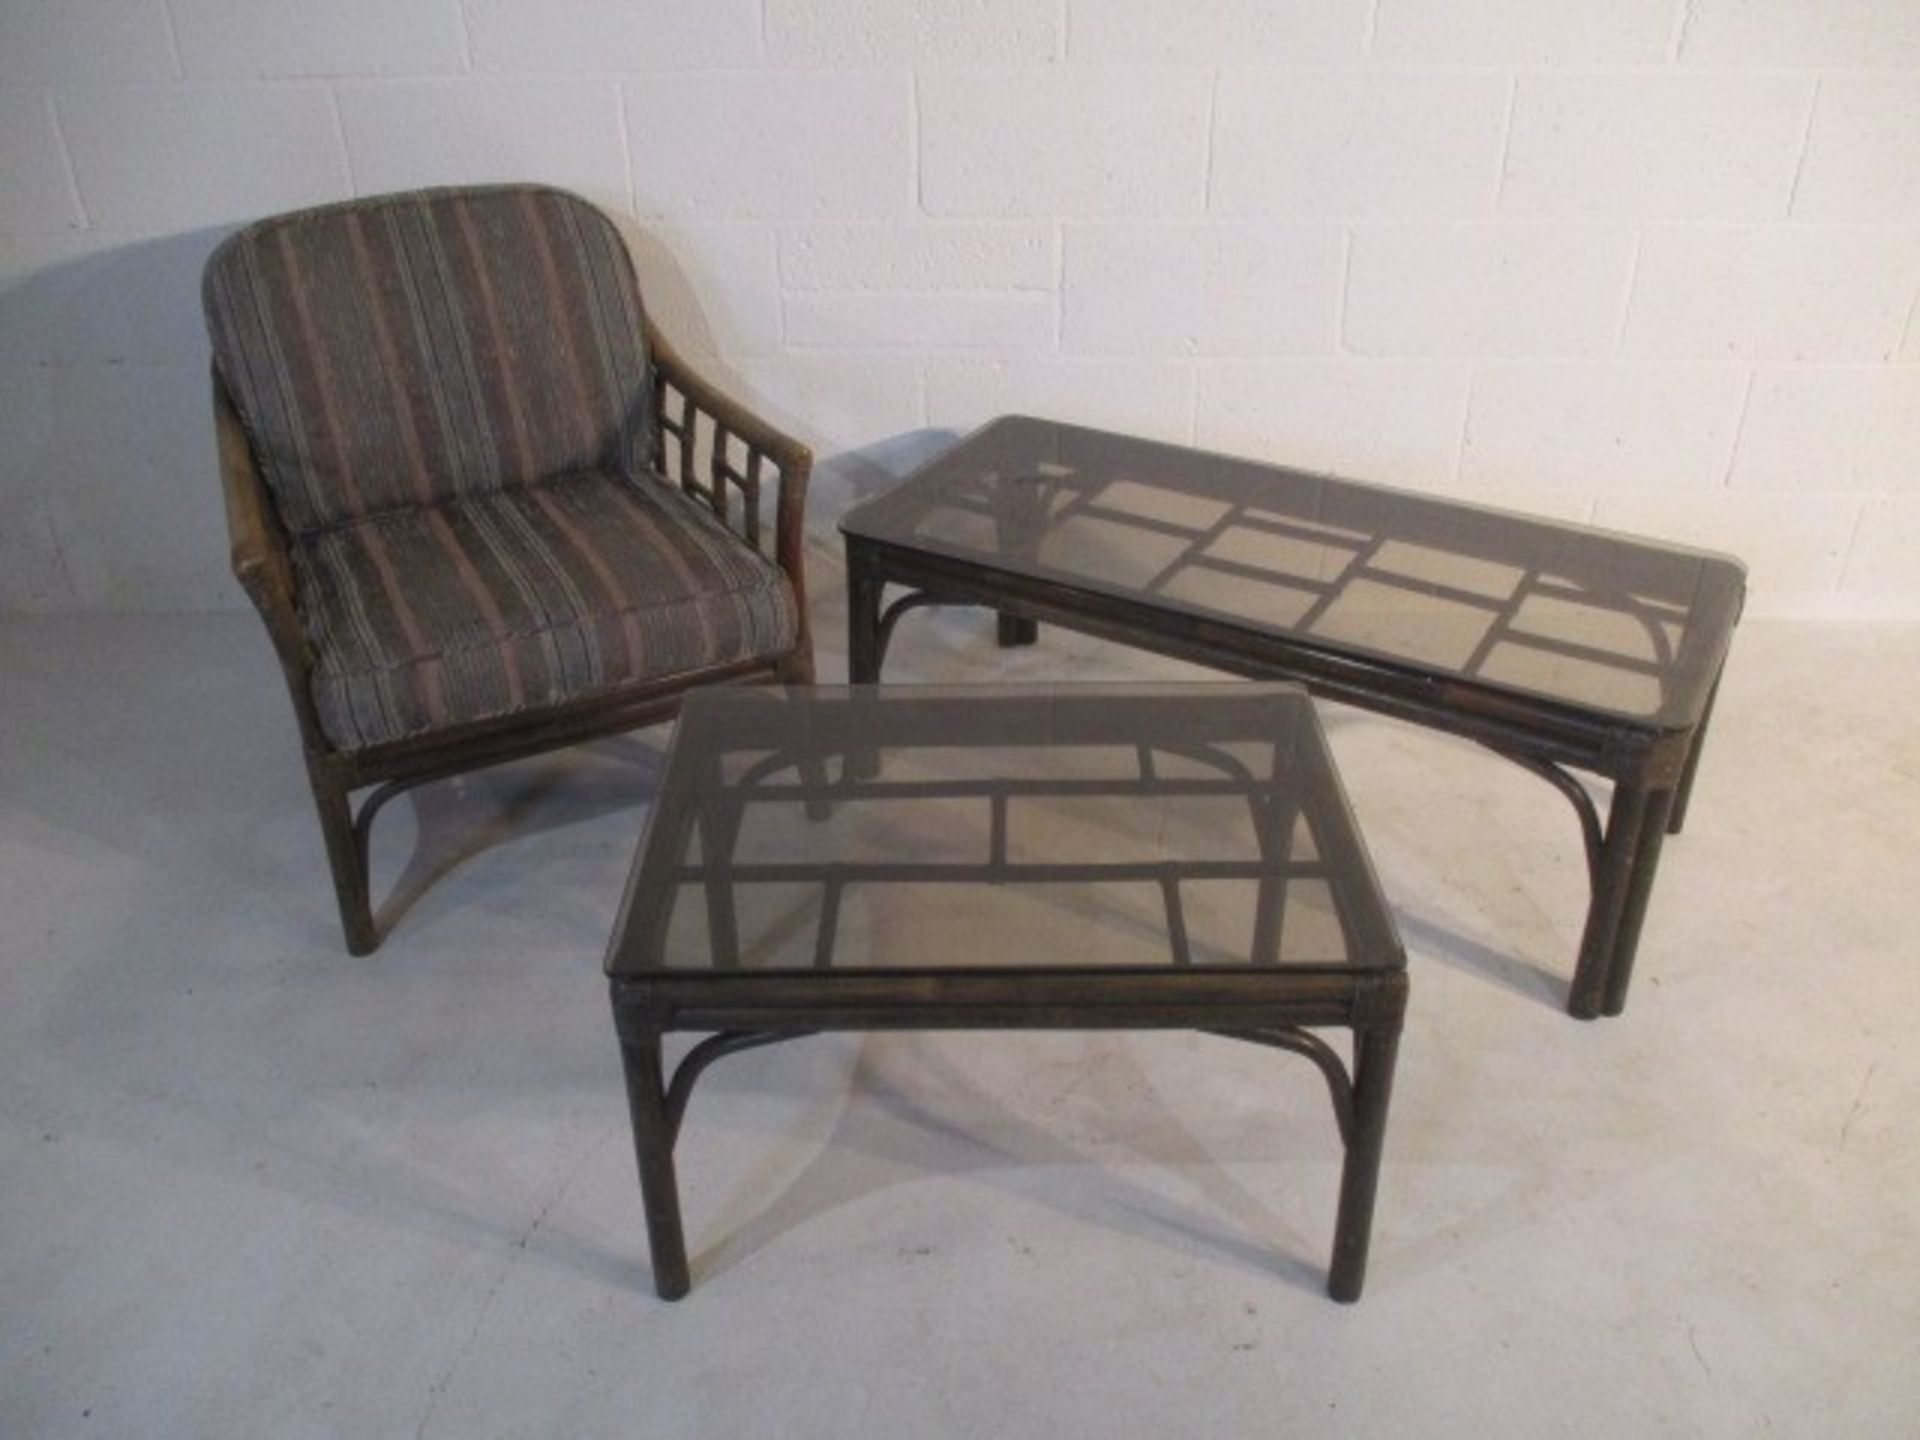 A conservatory chair along with two similar coffee tables